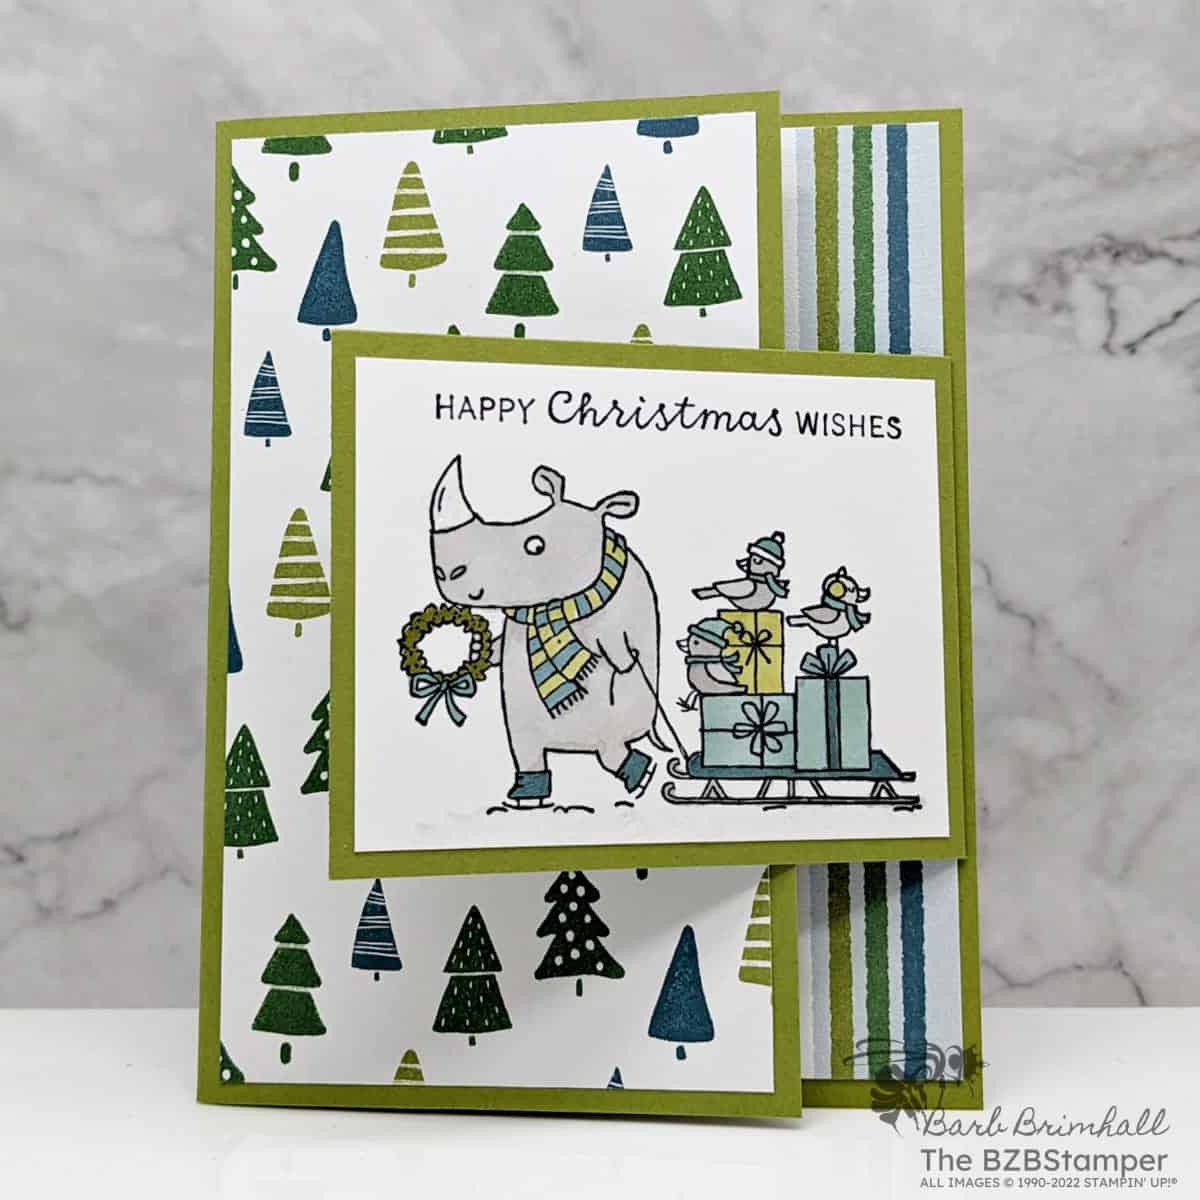 Christmas card with the Festive and Fun Stamp Set by Stampin' Up! in greens and blues featuring a rhino pulling a sled with birds and presents and sentiment "Happy Christmas Wishes."